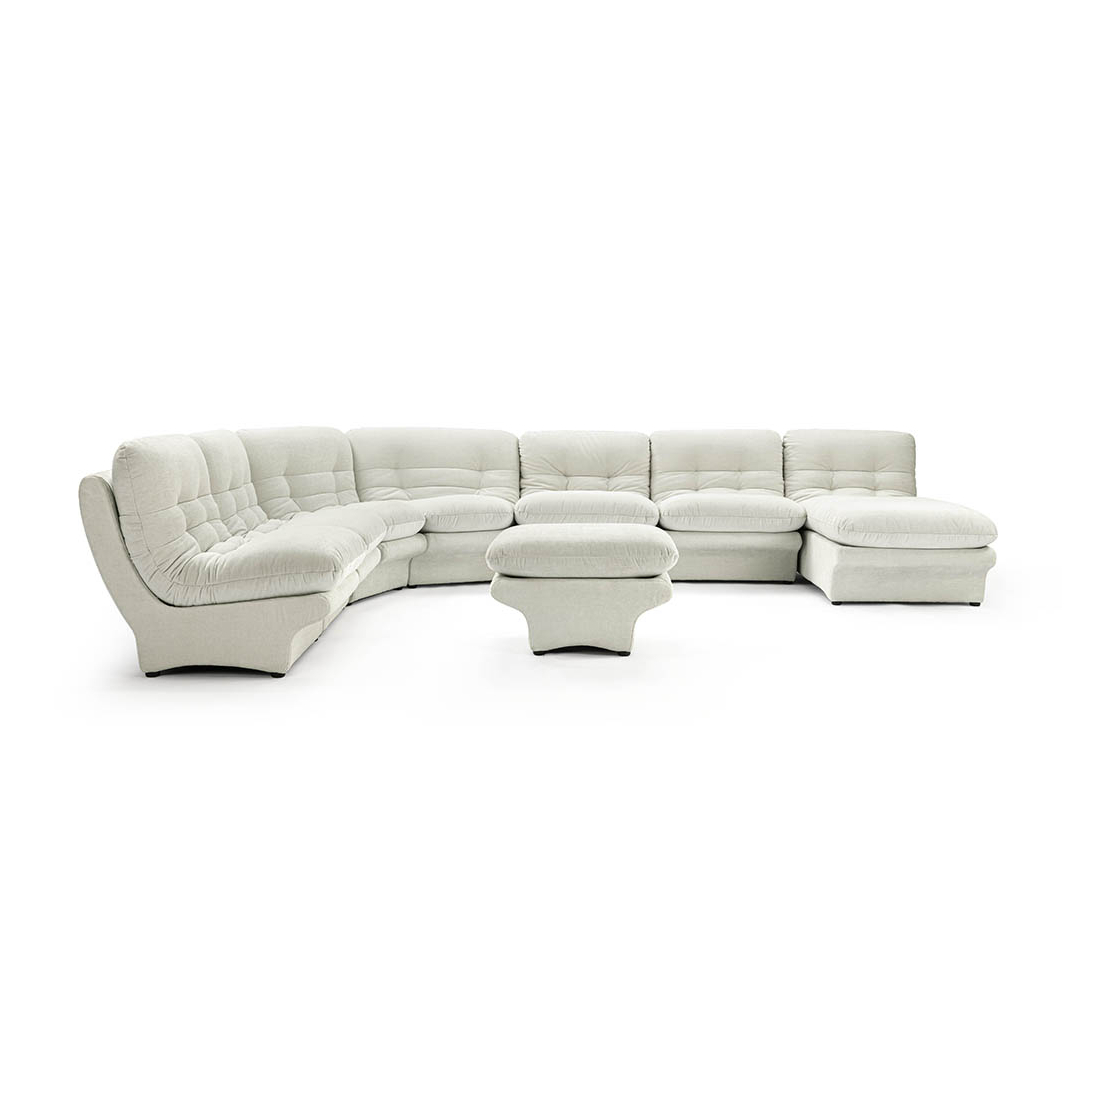 Carsons Mid Century Curved Modular Sectional Sofa | Combination 001